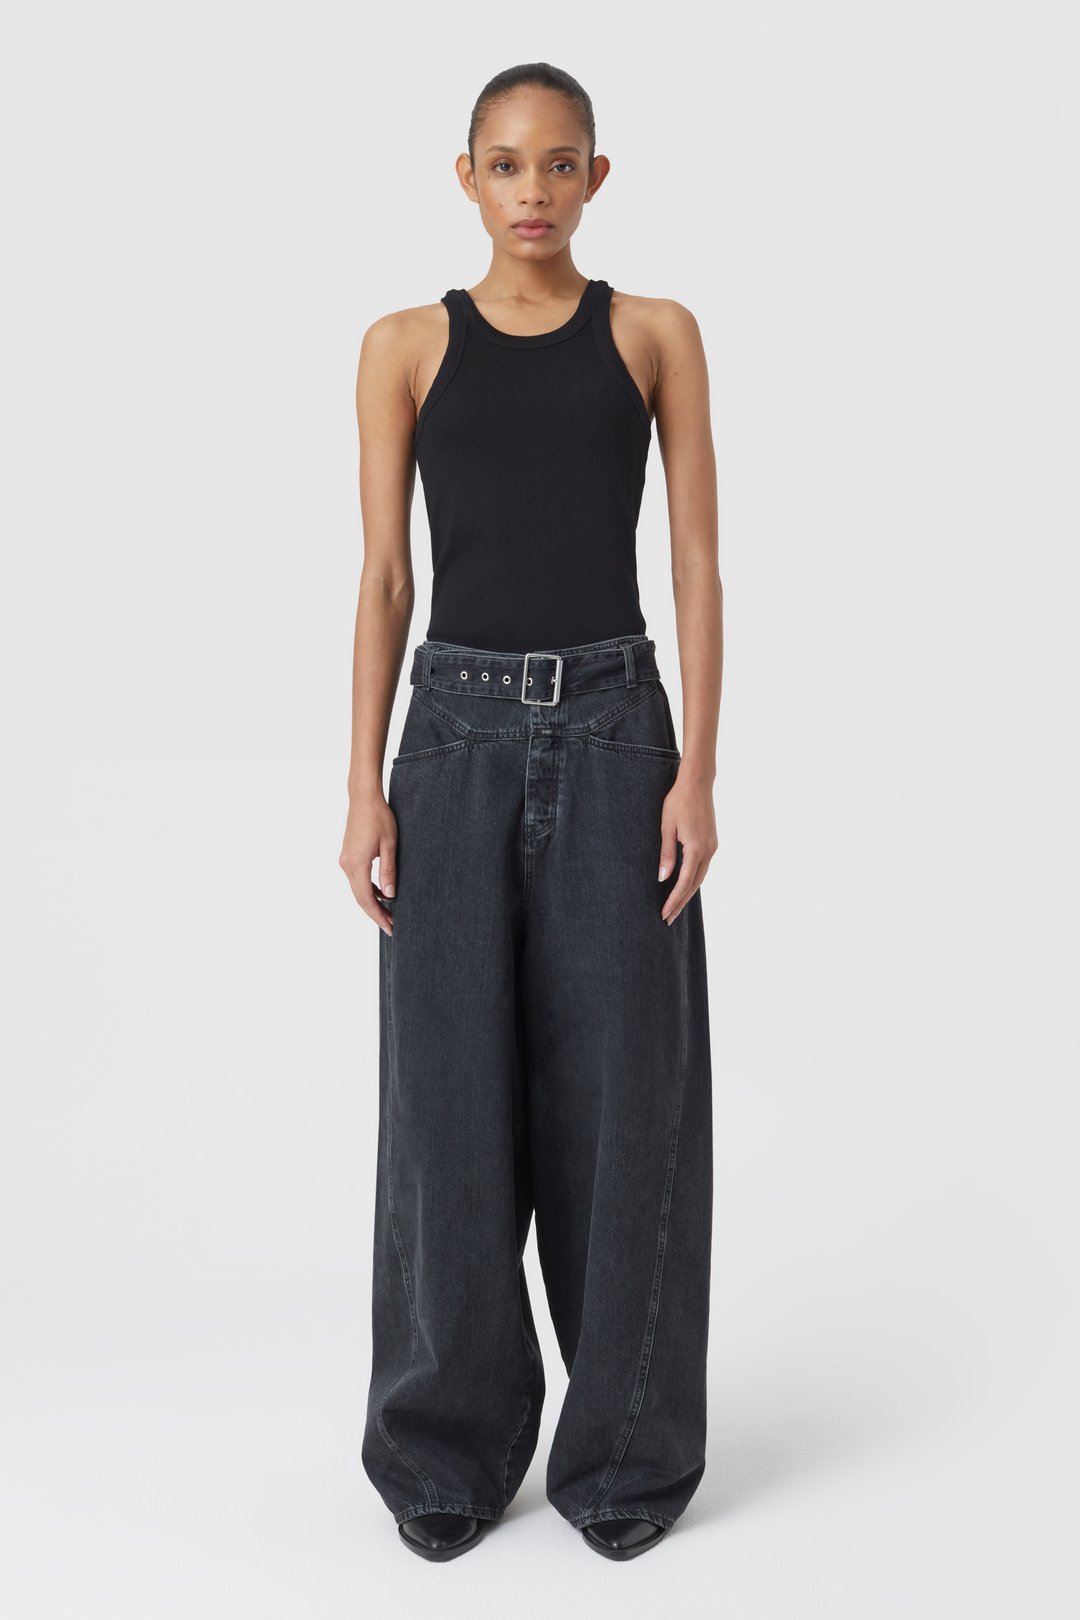 WIDE JEANS - BAGGY-X | NAME STYLE CLOSED